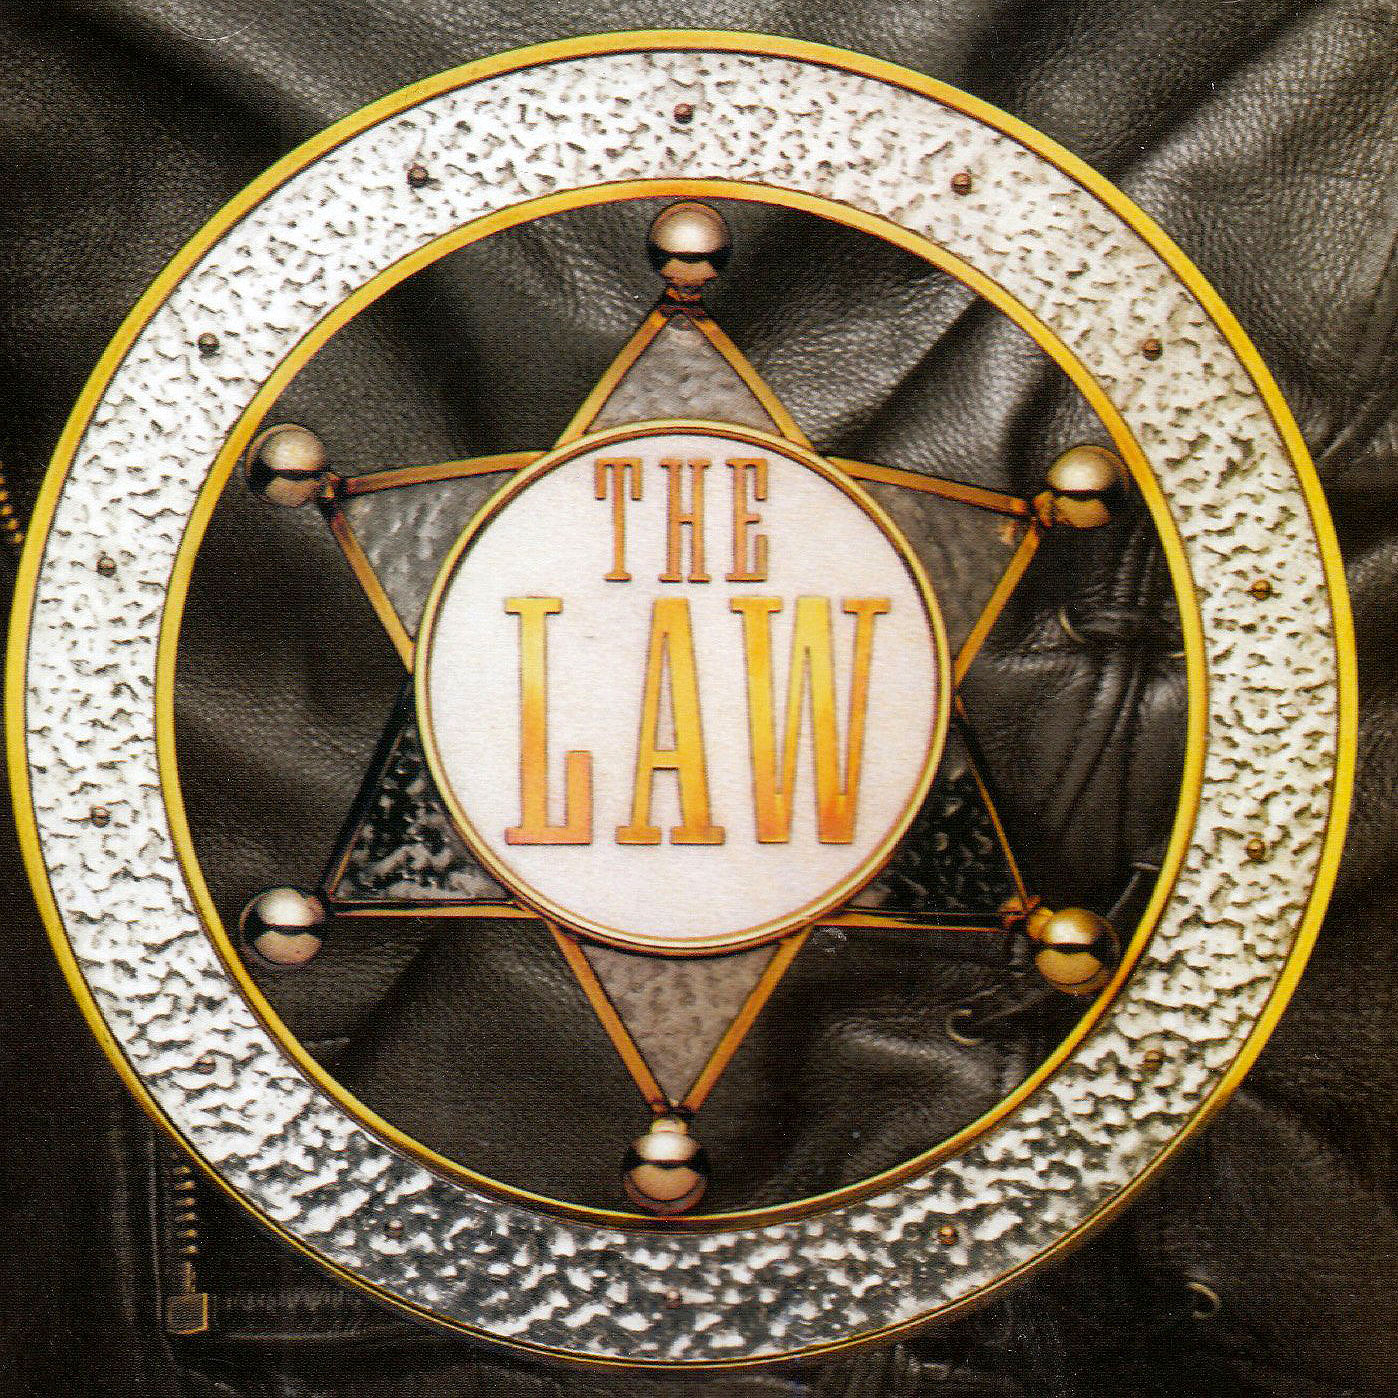 The Law - Kenney Jones, Paul Rodgers, cover